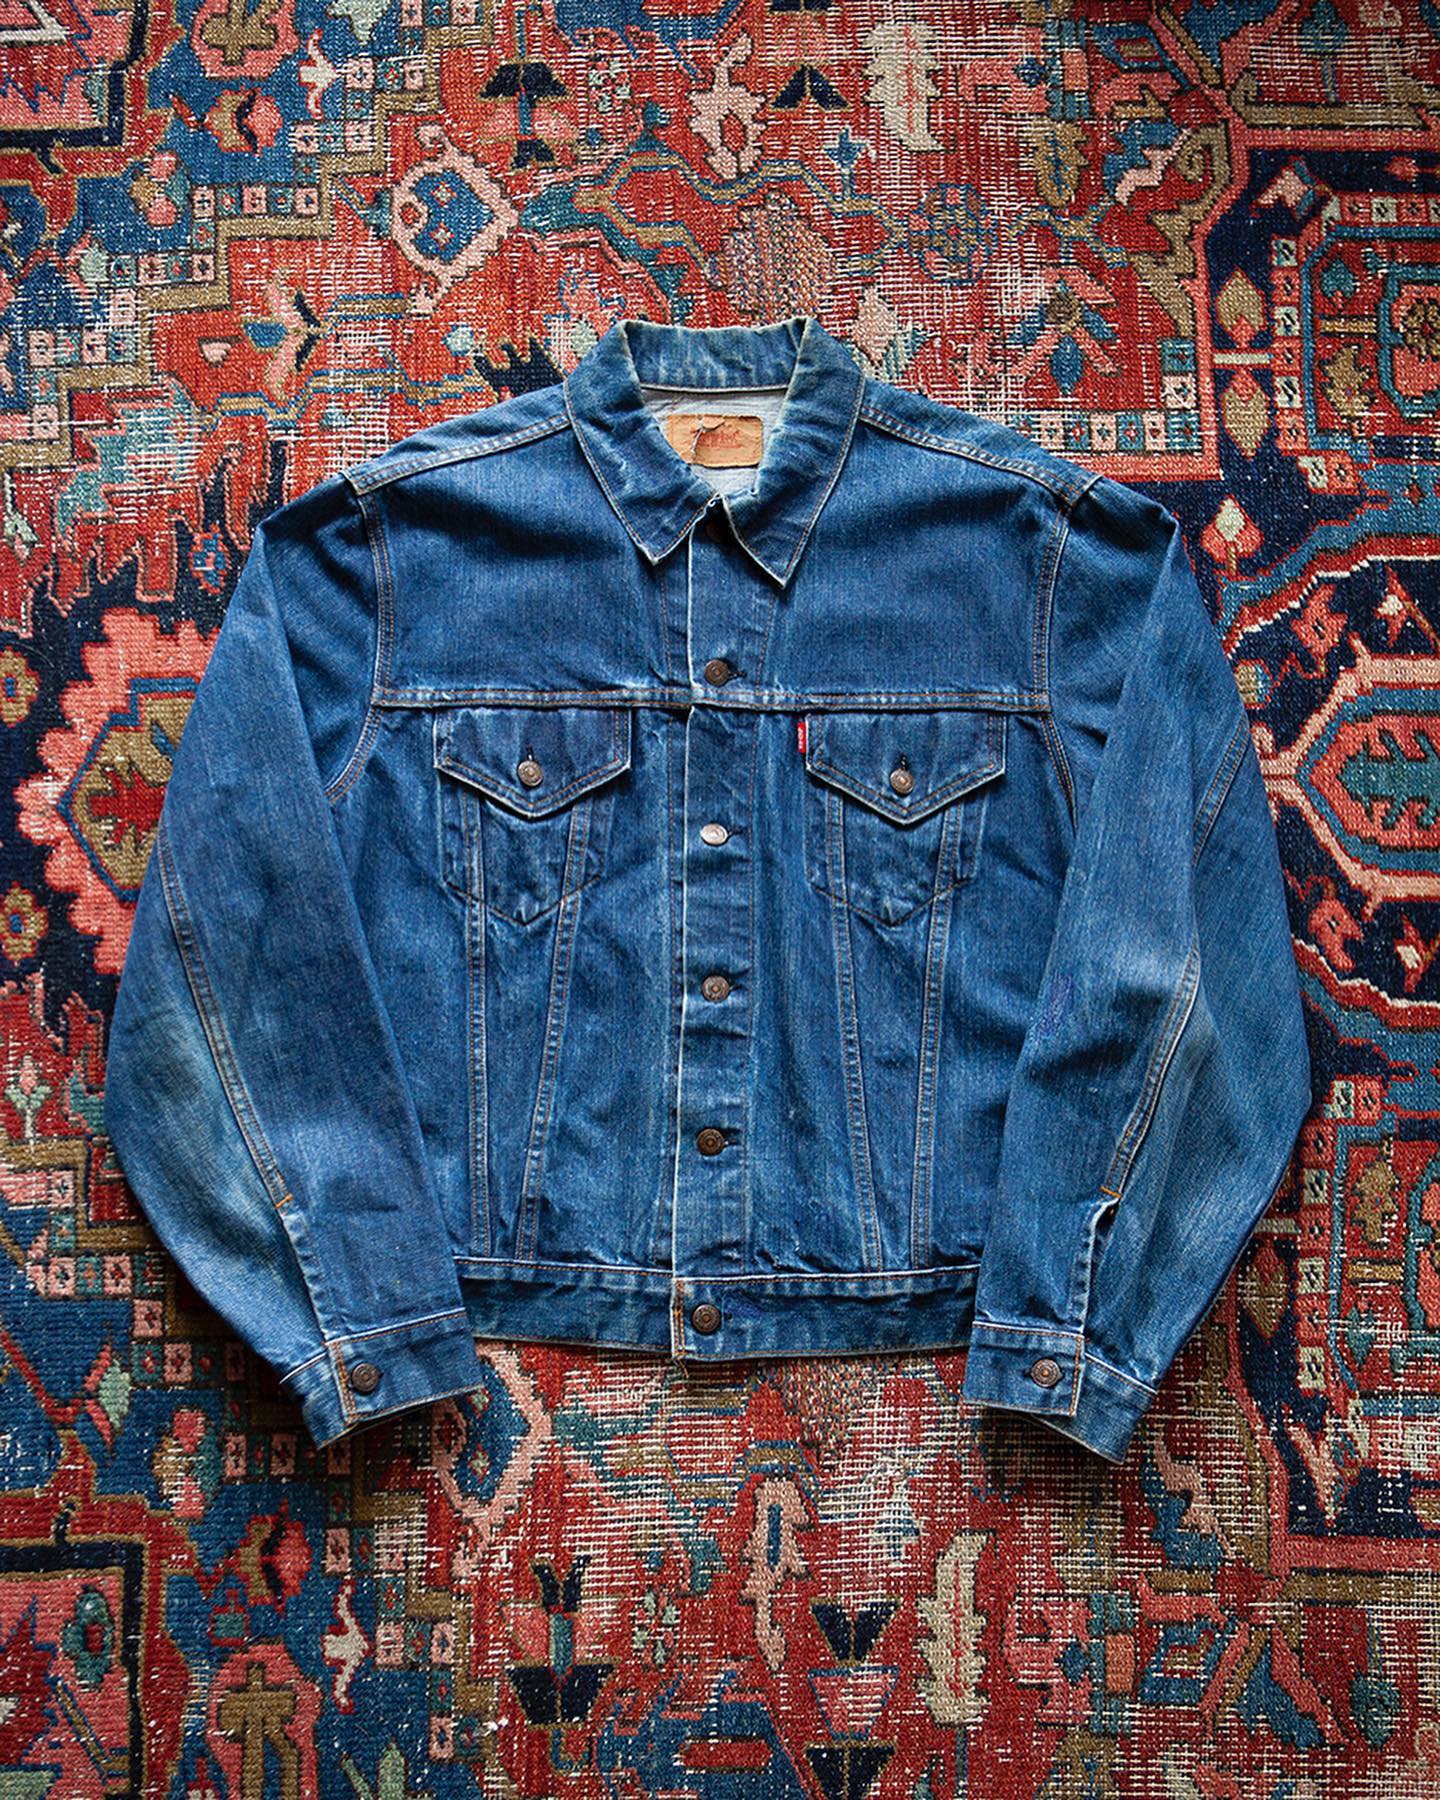 The best vintage shops in Amsterdam | a denim jacket on a paisley pattern rug at Ckx studio